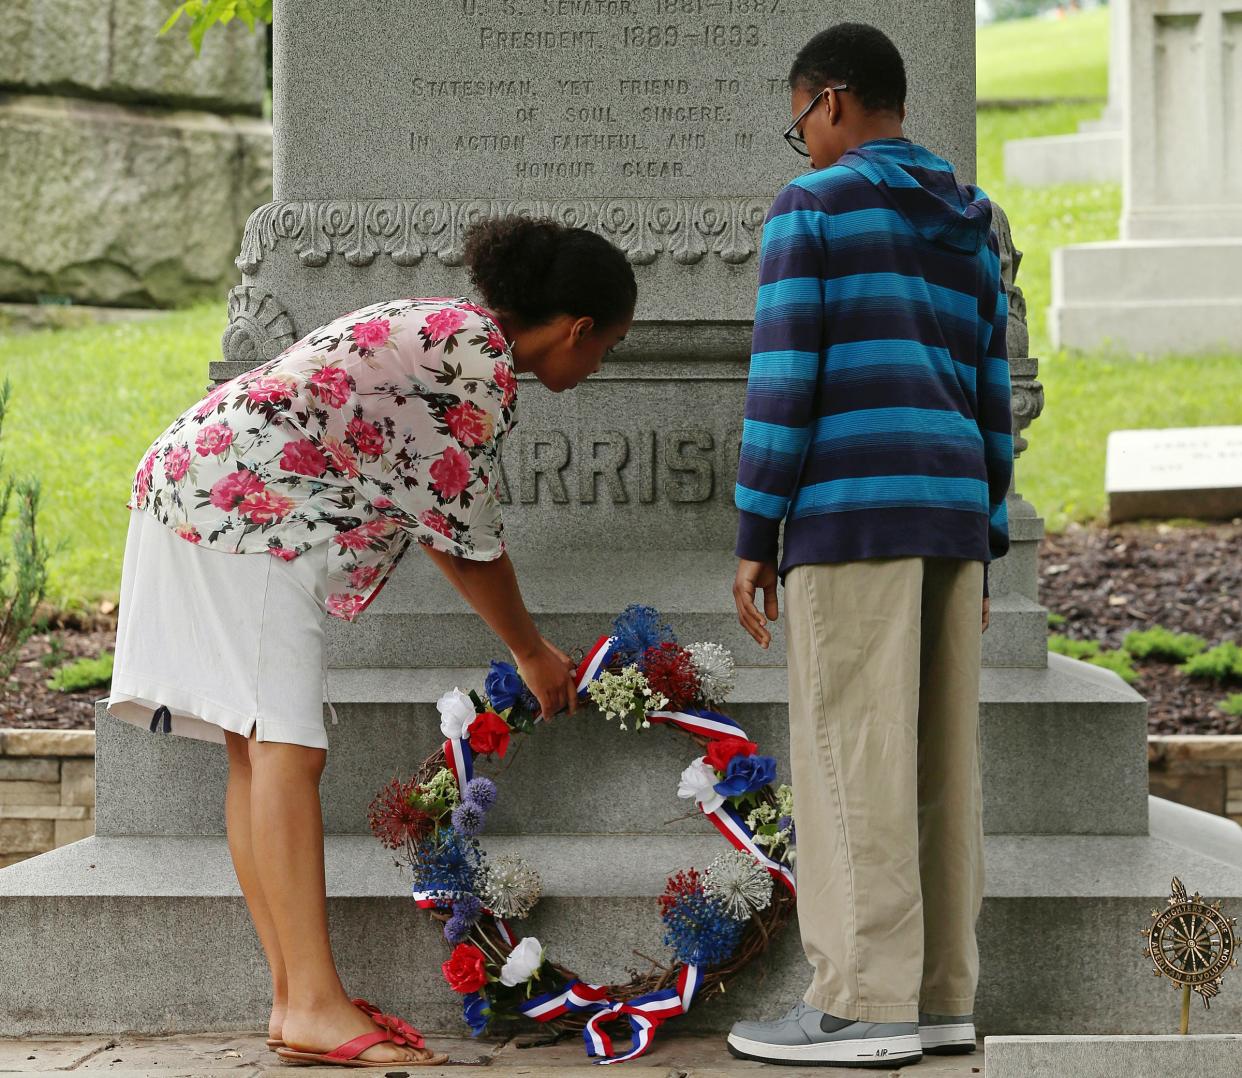 From left, Elisabeth Reese, 16, and Edwin Girton, 13, place a wreath on twenty-third president of the United States Benjamin Harrison's grave, Friday, July 3, 2015, at Crown Hill Cemetery, Indianapolis, Ind.